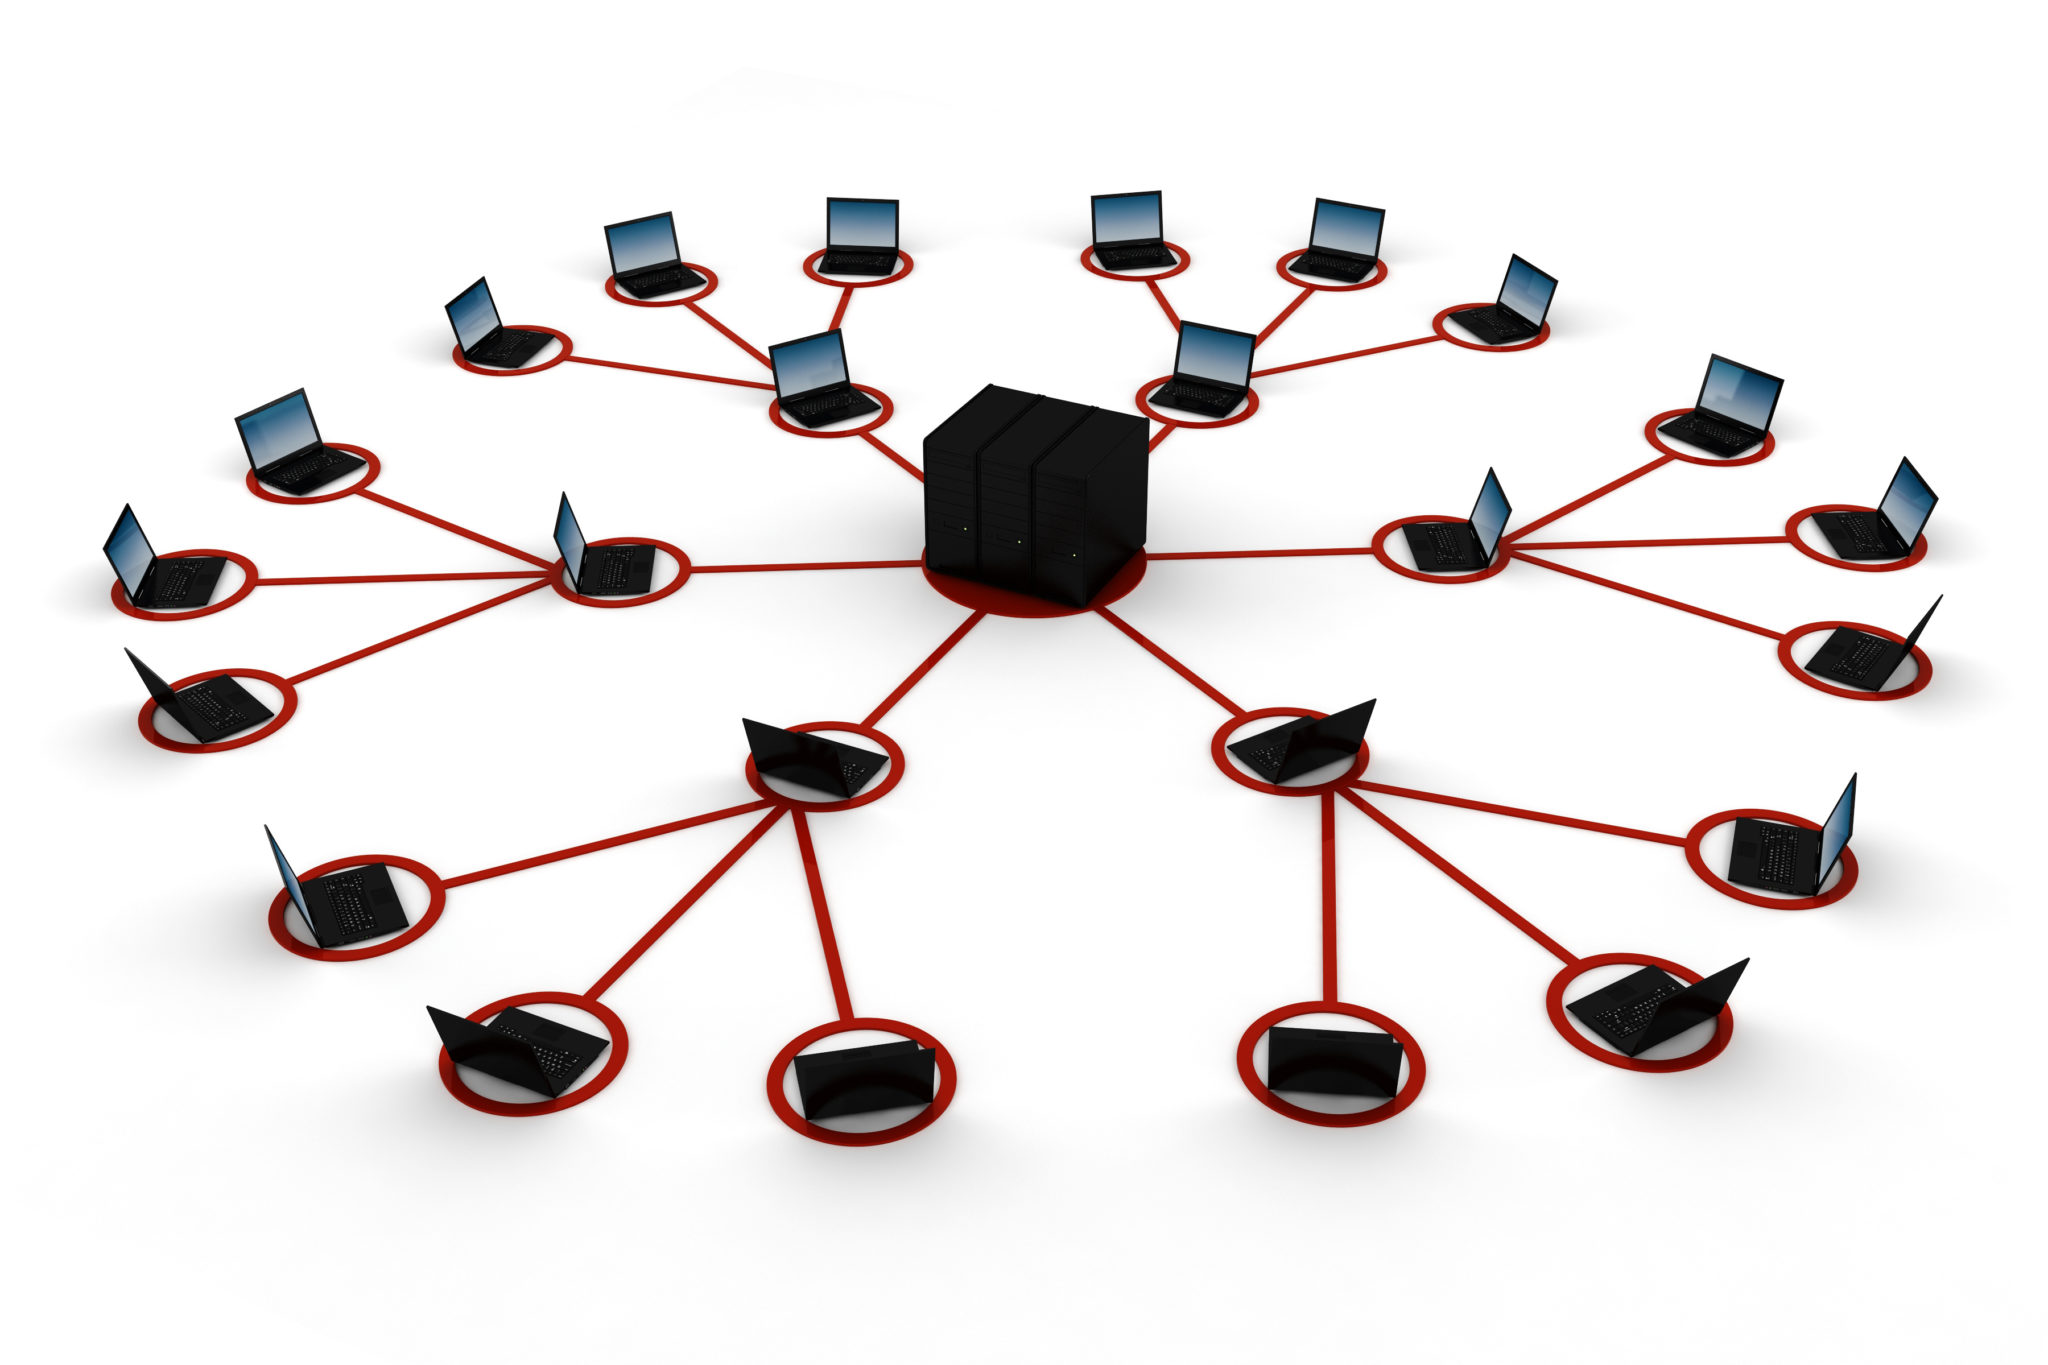 Conceptual image of a server delivering content to a global network of computers